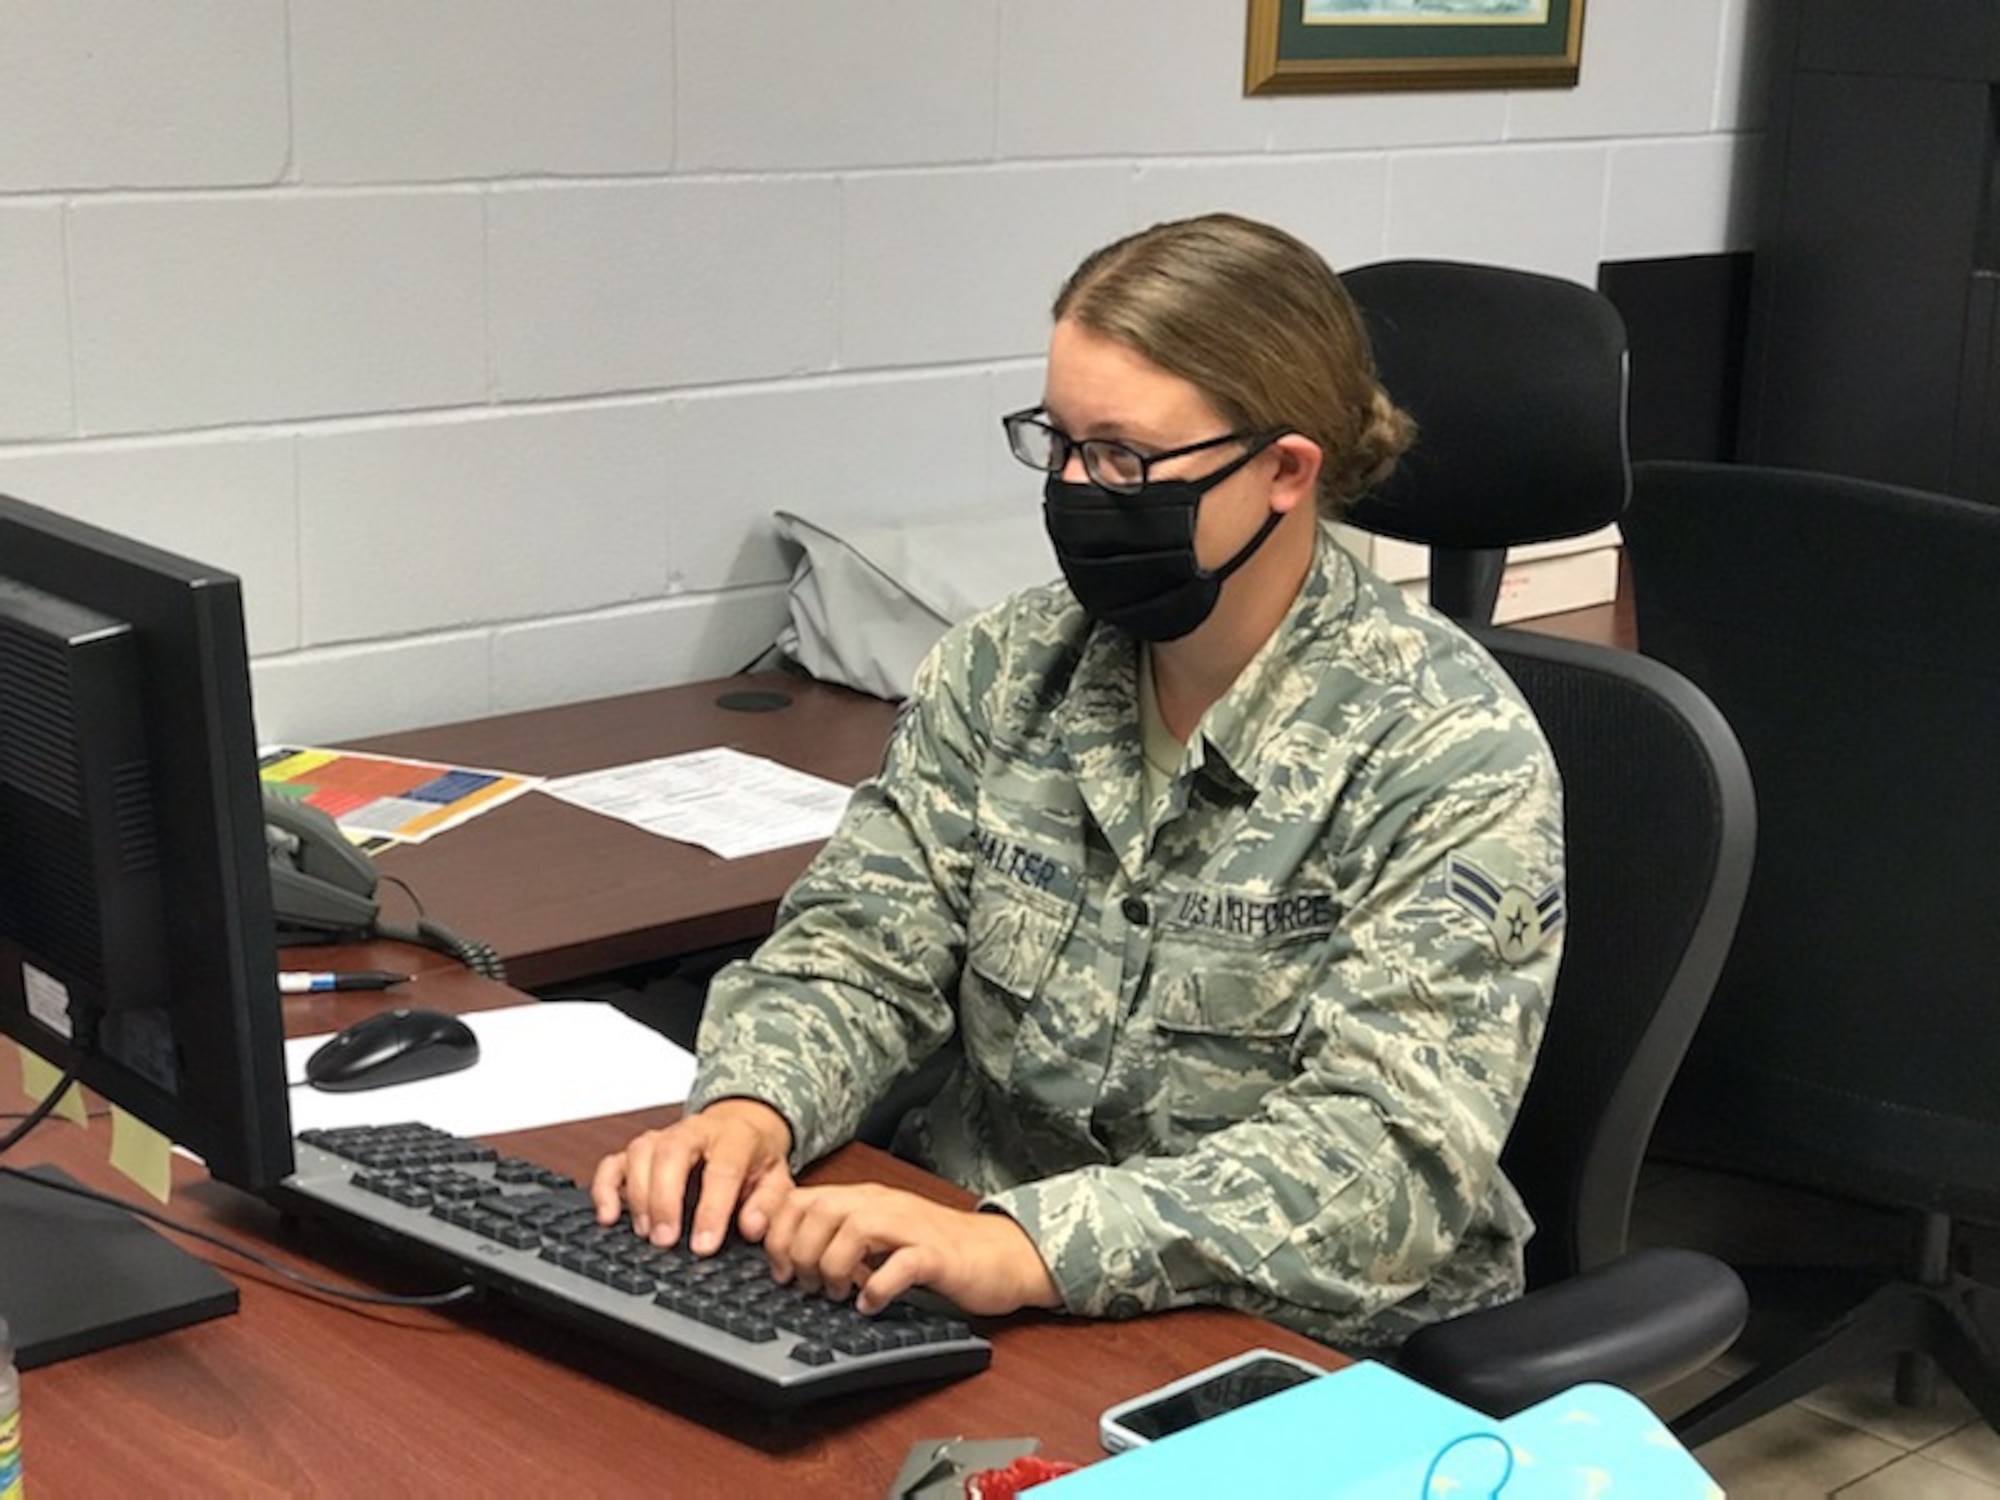 Airman First Class Robin Burkhalter, a personnel journeyman with the 186th Maintenance Group, works at her desk while wearing a hand-made face mask at Key Field Air National Guard Base, Meridian, Mississippi, May 6, 2020.